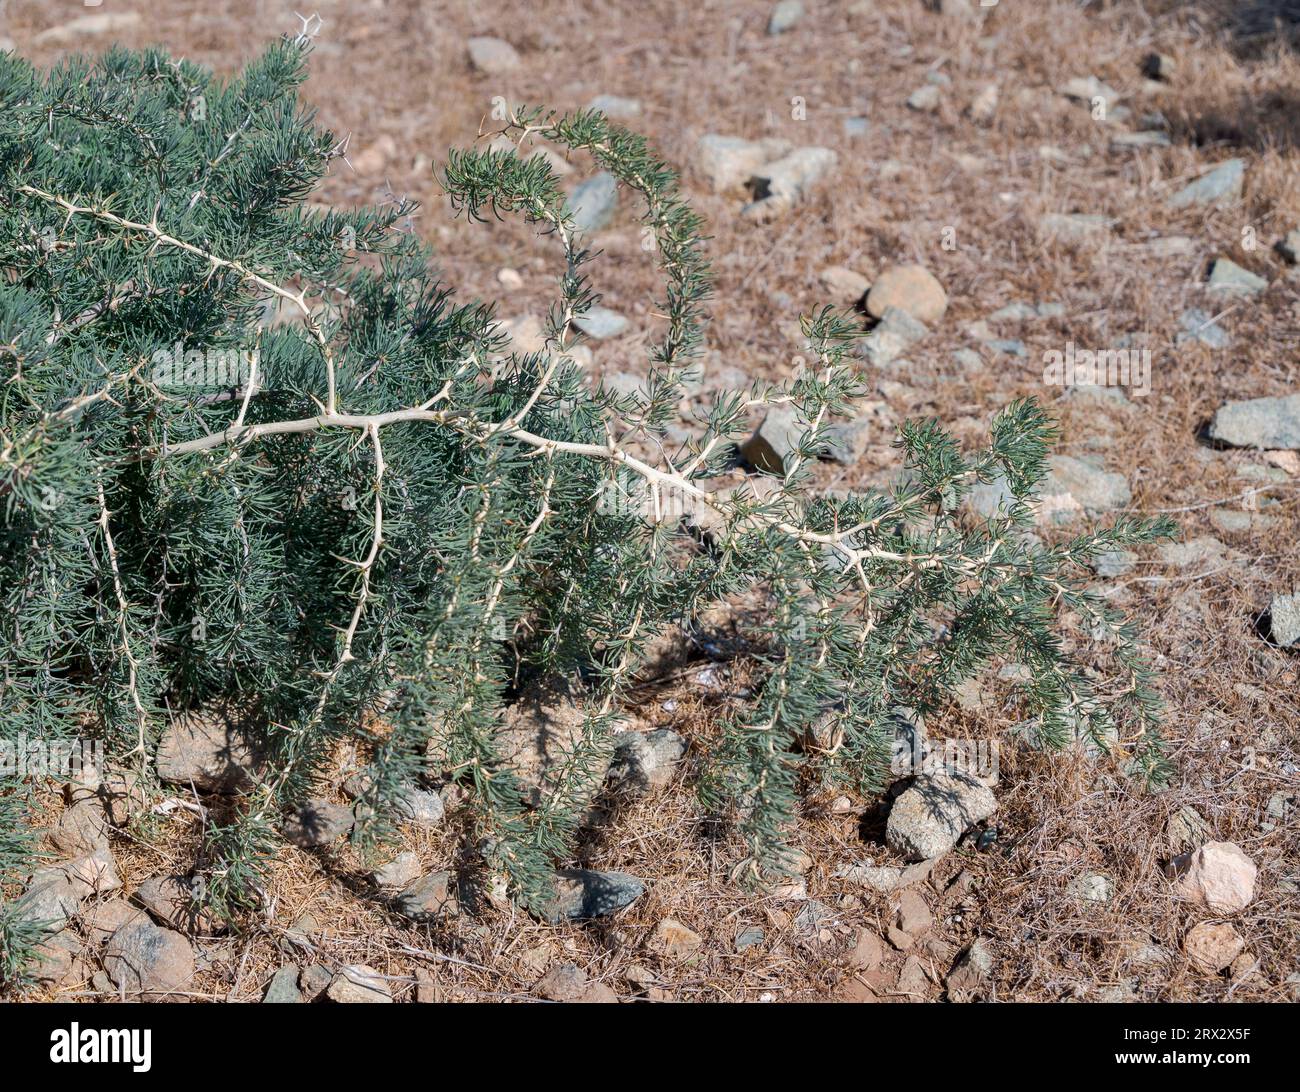 Asparagus albus. Photo taken in the Tabarca Island, province of Alicante, Spain Stock Photo